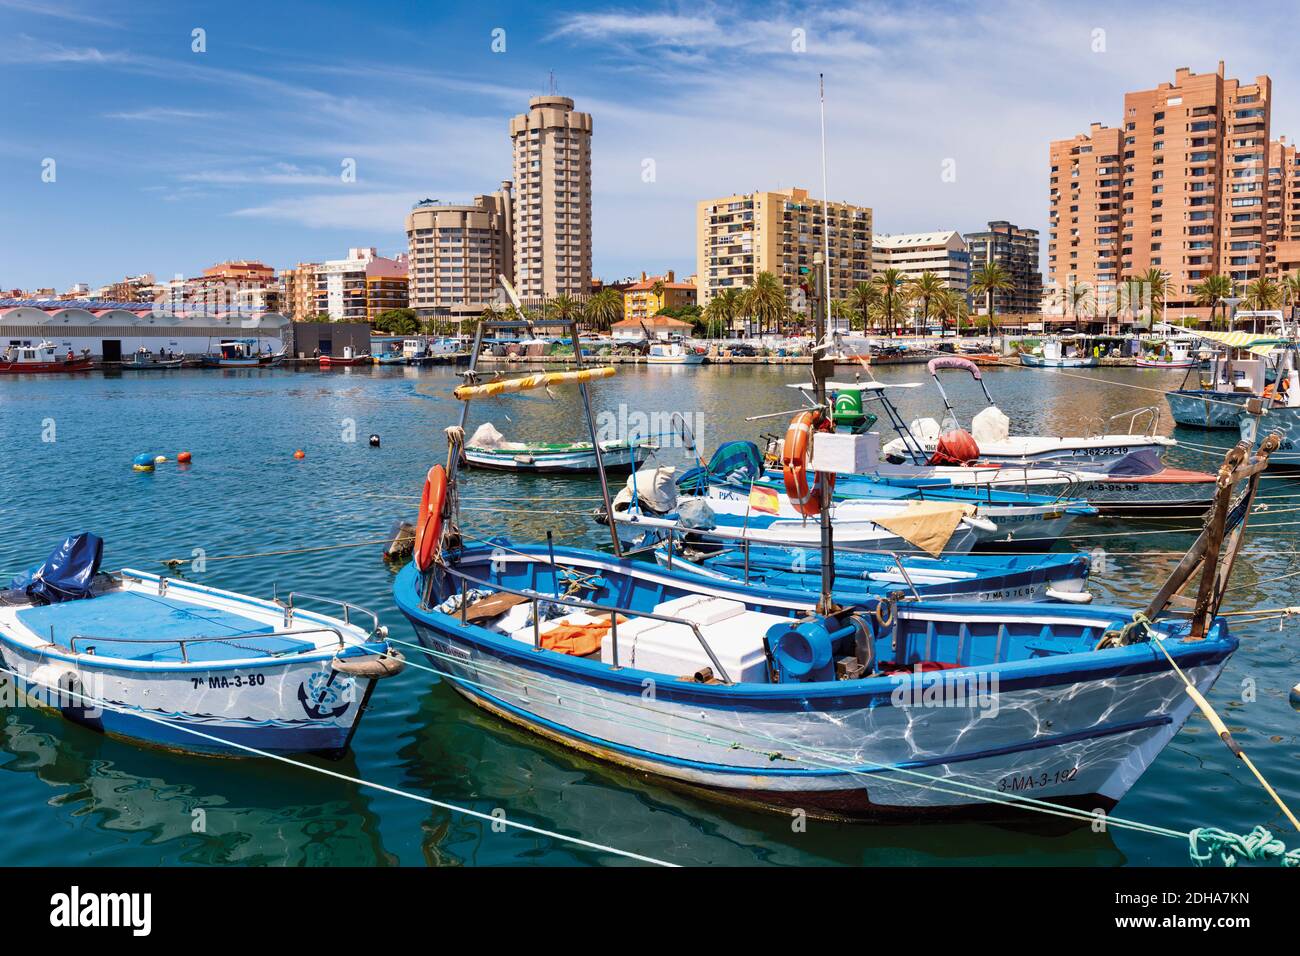 Fishing boats in harbour, Fuengirola, Costa del Sol, Malaga Province, Andalusia, southern Spain. Stock Photo